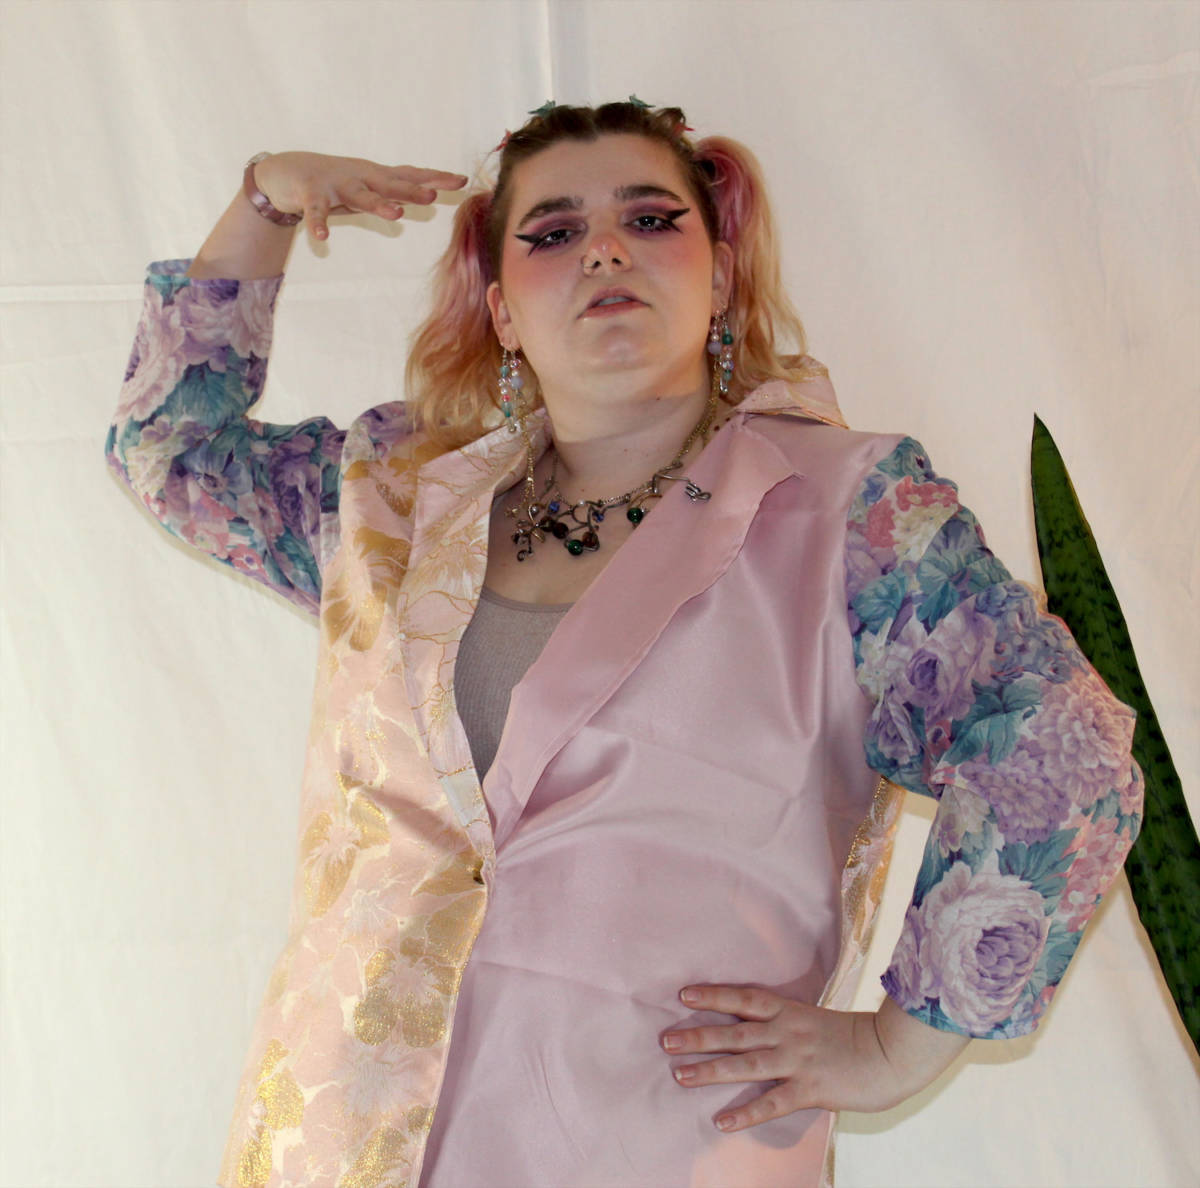 The artist is wearing wearable two in a closeup. The piece is a suit jacket which features a pink satin fabric with a gold metallic floral design as the body of the work. The sleeves are a floral fabric with shades of green, purple, and pink.